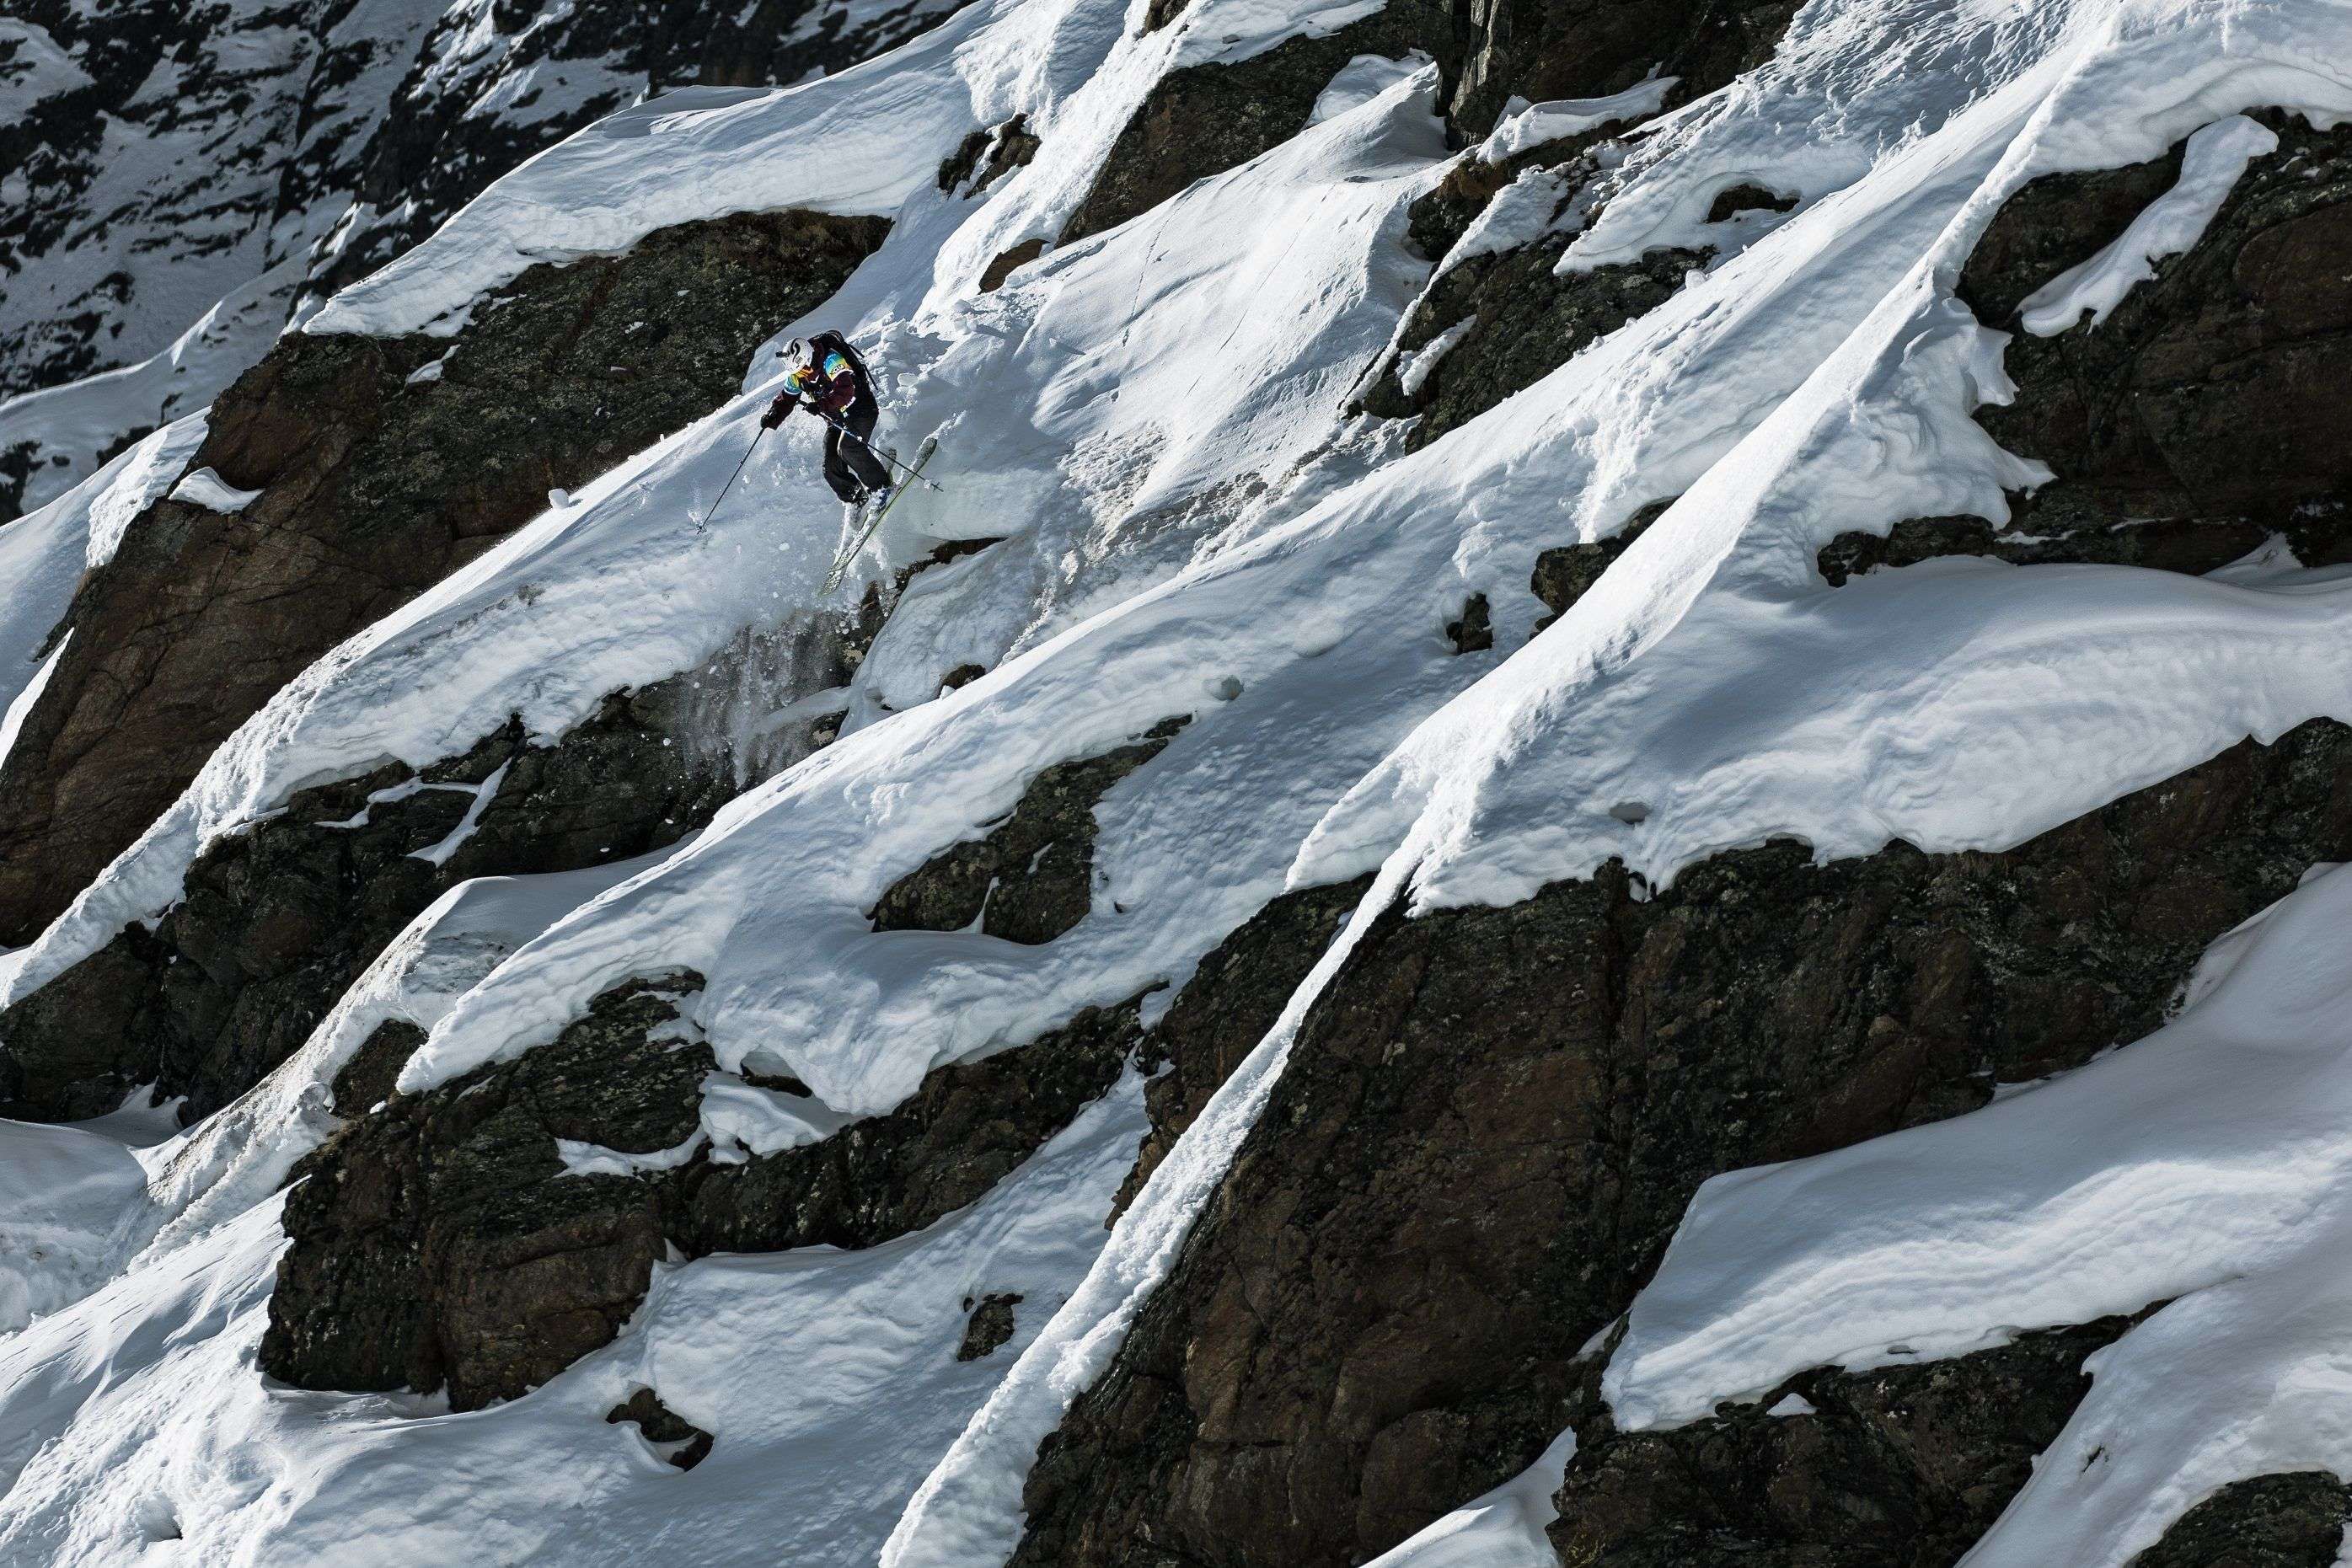 The Open Faces Freeride Series is ready for a spectacular season